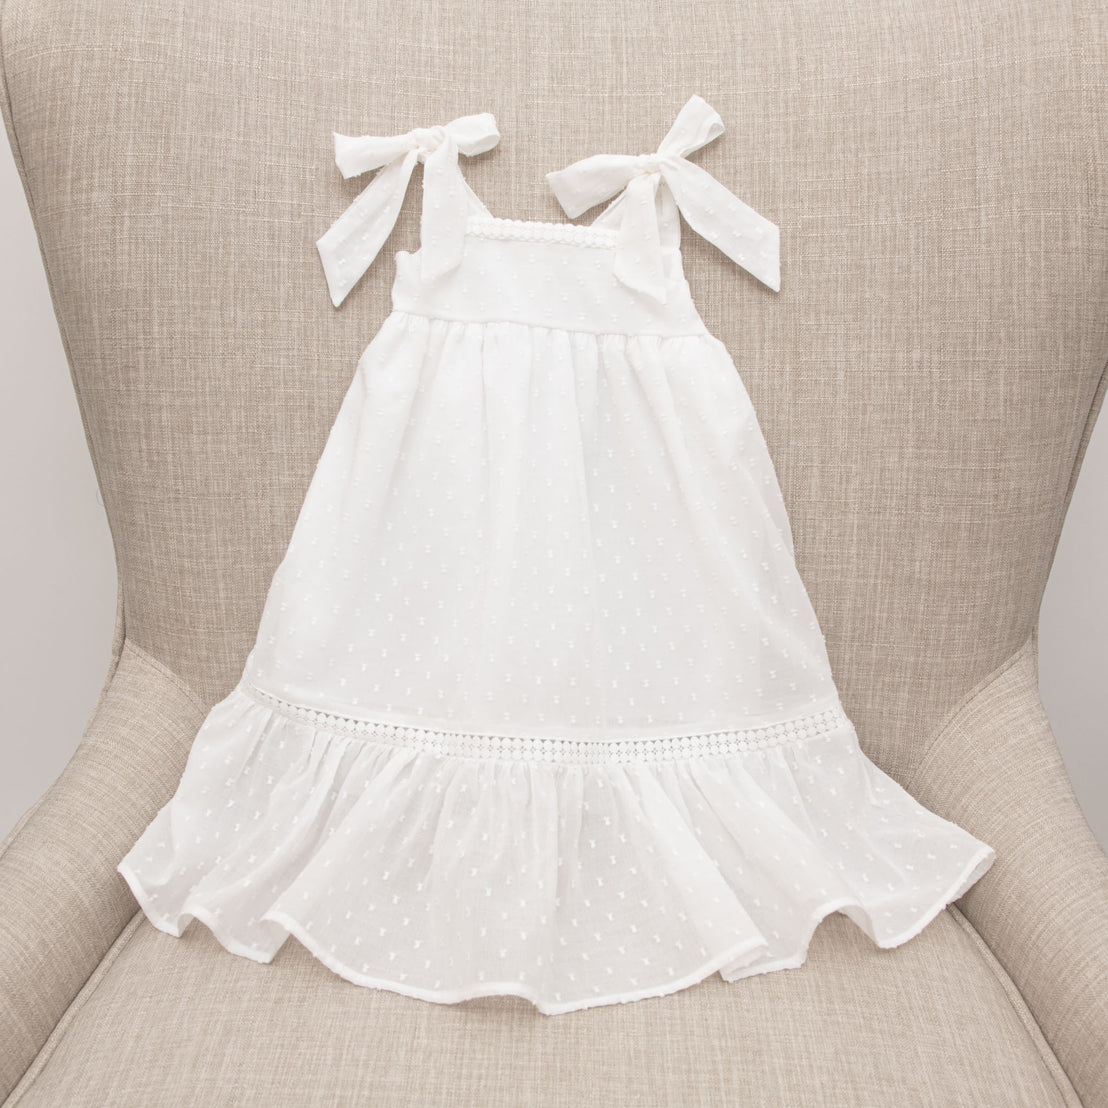 The Mila Cotton Gown with tie straps on the shoulders and a ruffle hem displayed on a beige upholstered chair. The gown features delicate lace detailing near the hemline.